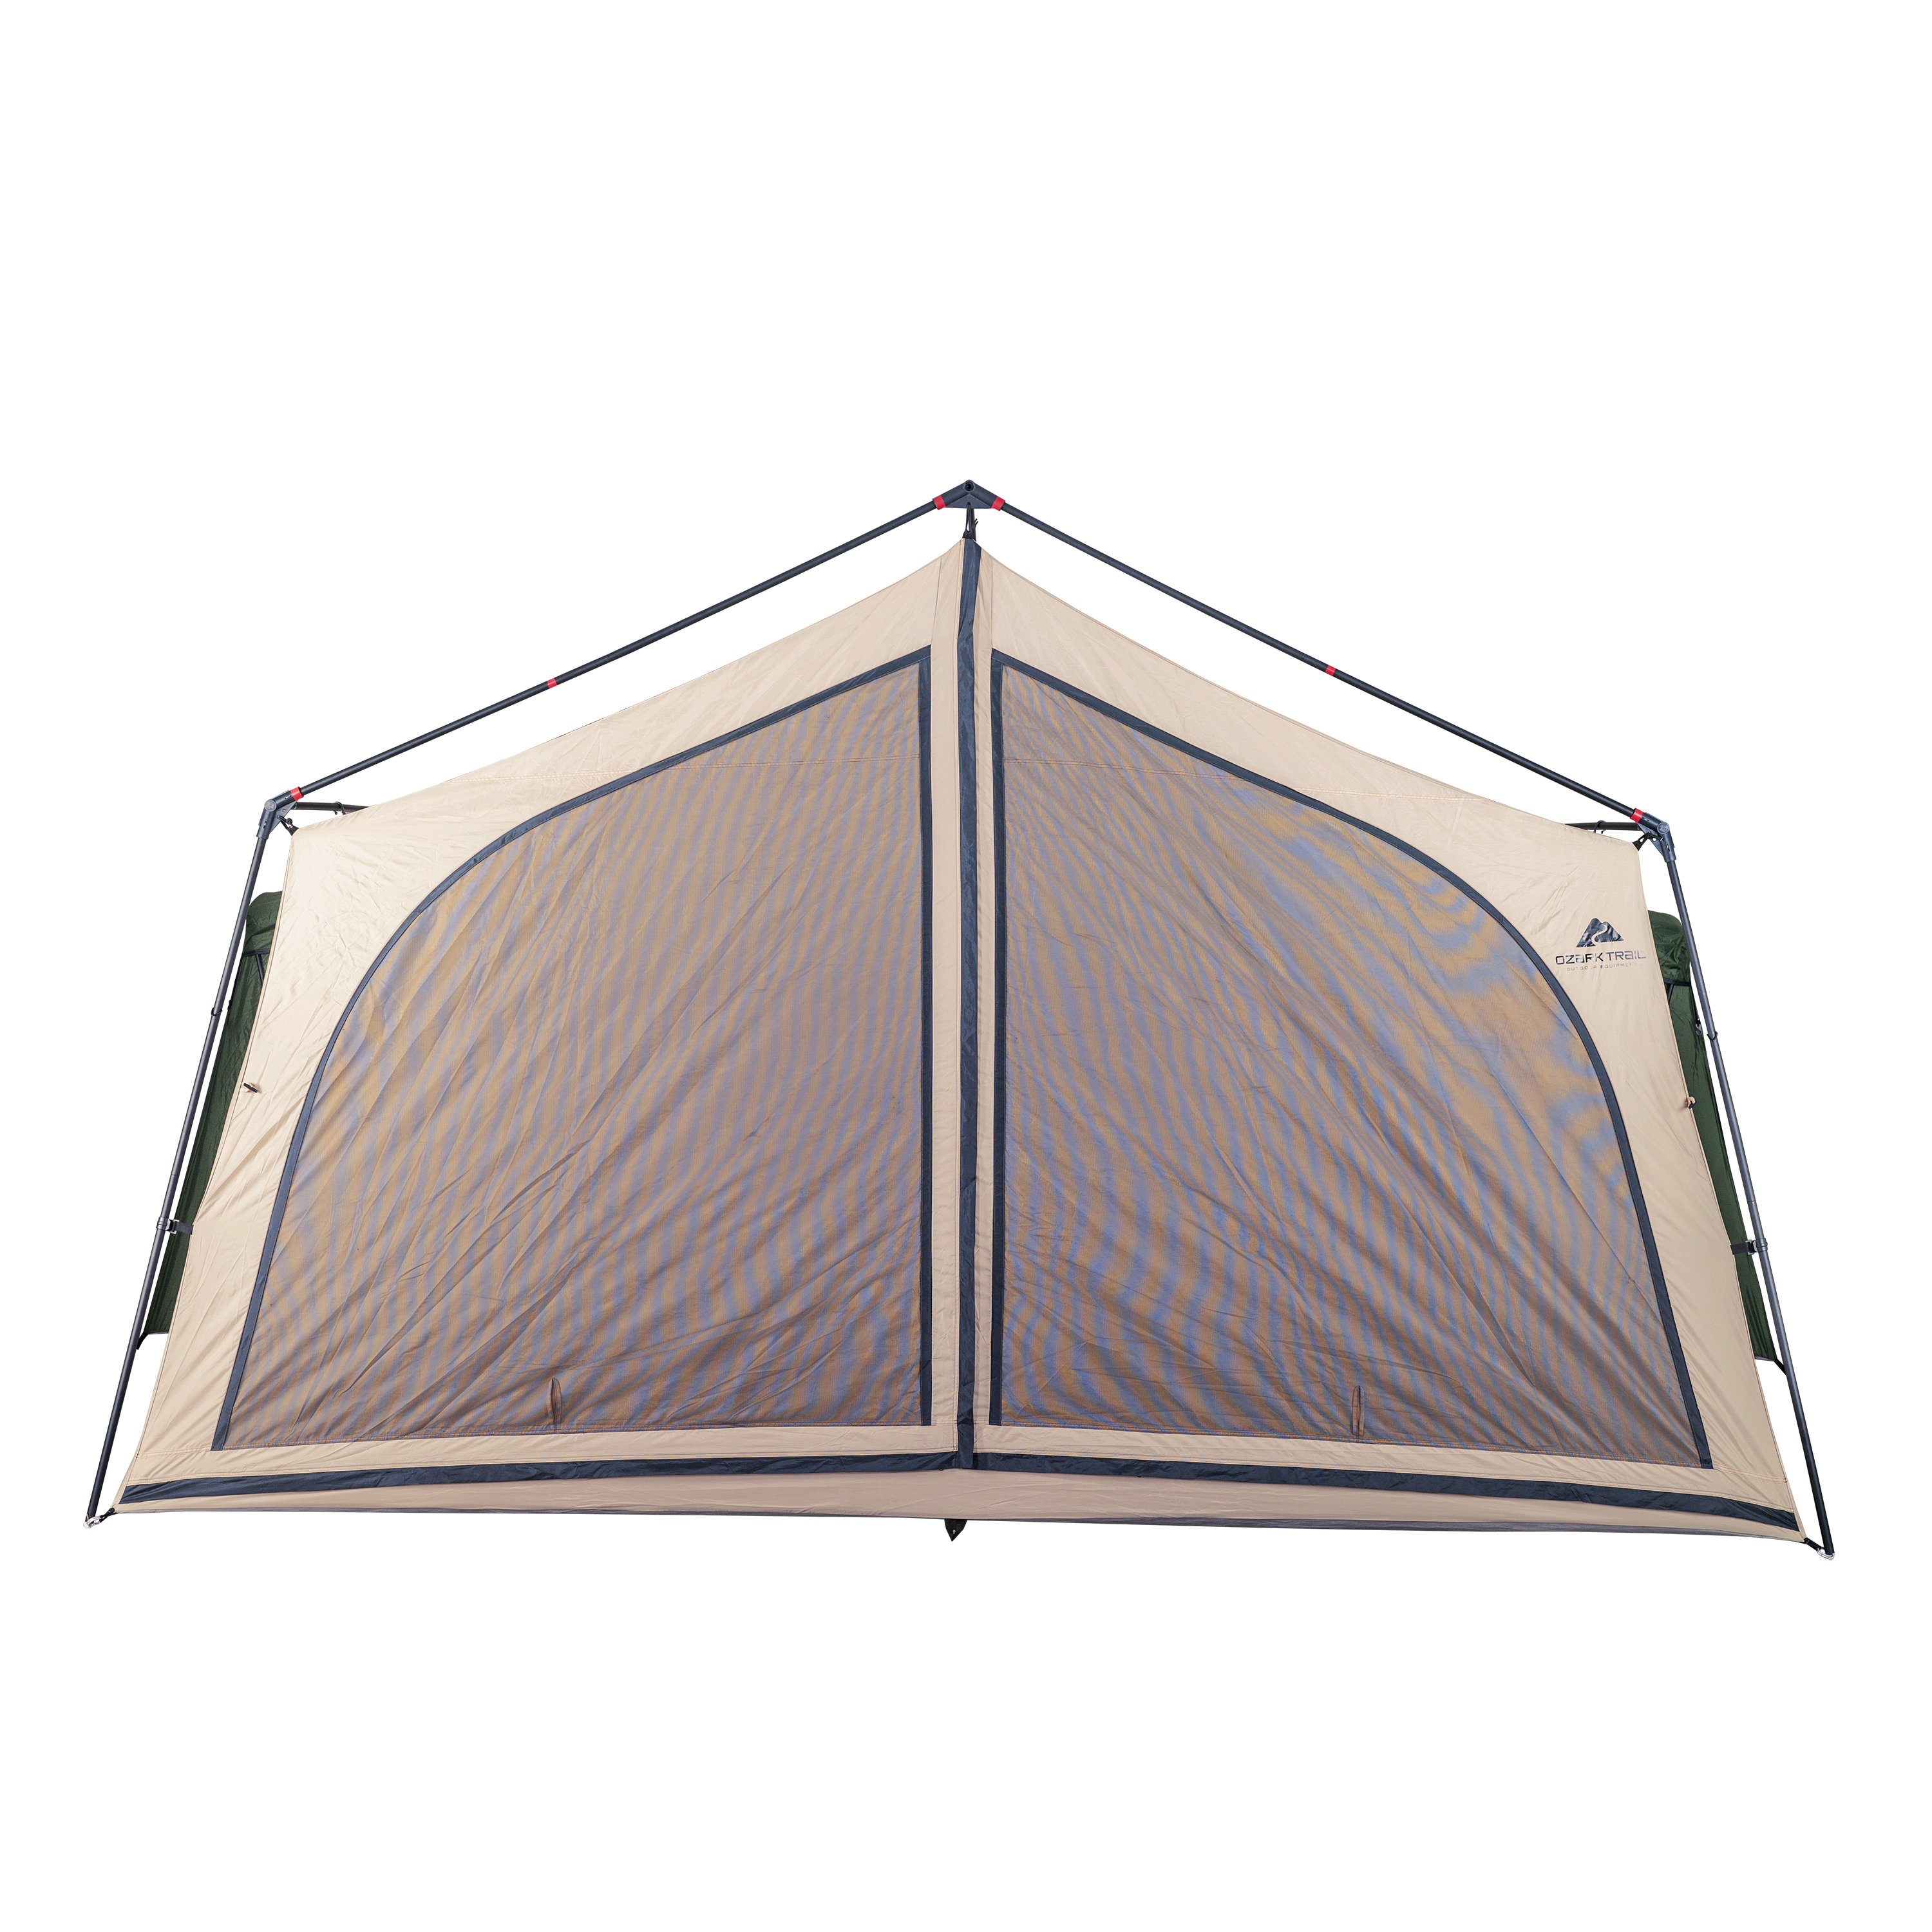 Ozark Trail 14-Person Cabin Tent for Camping - image 5 of 10